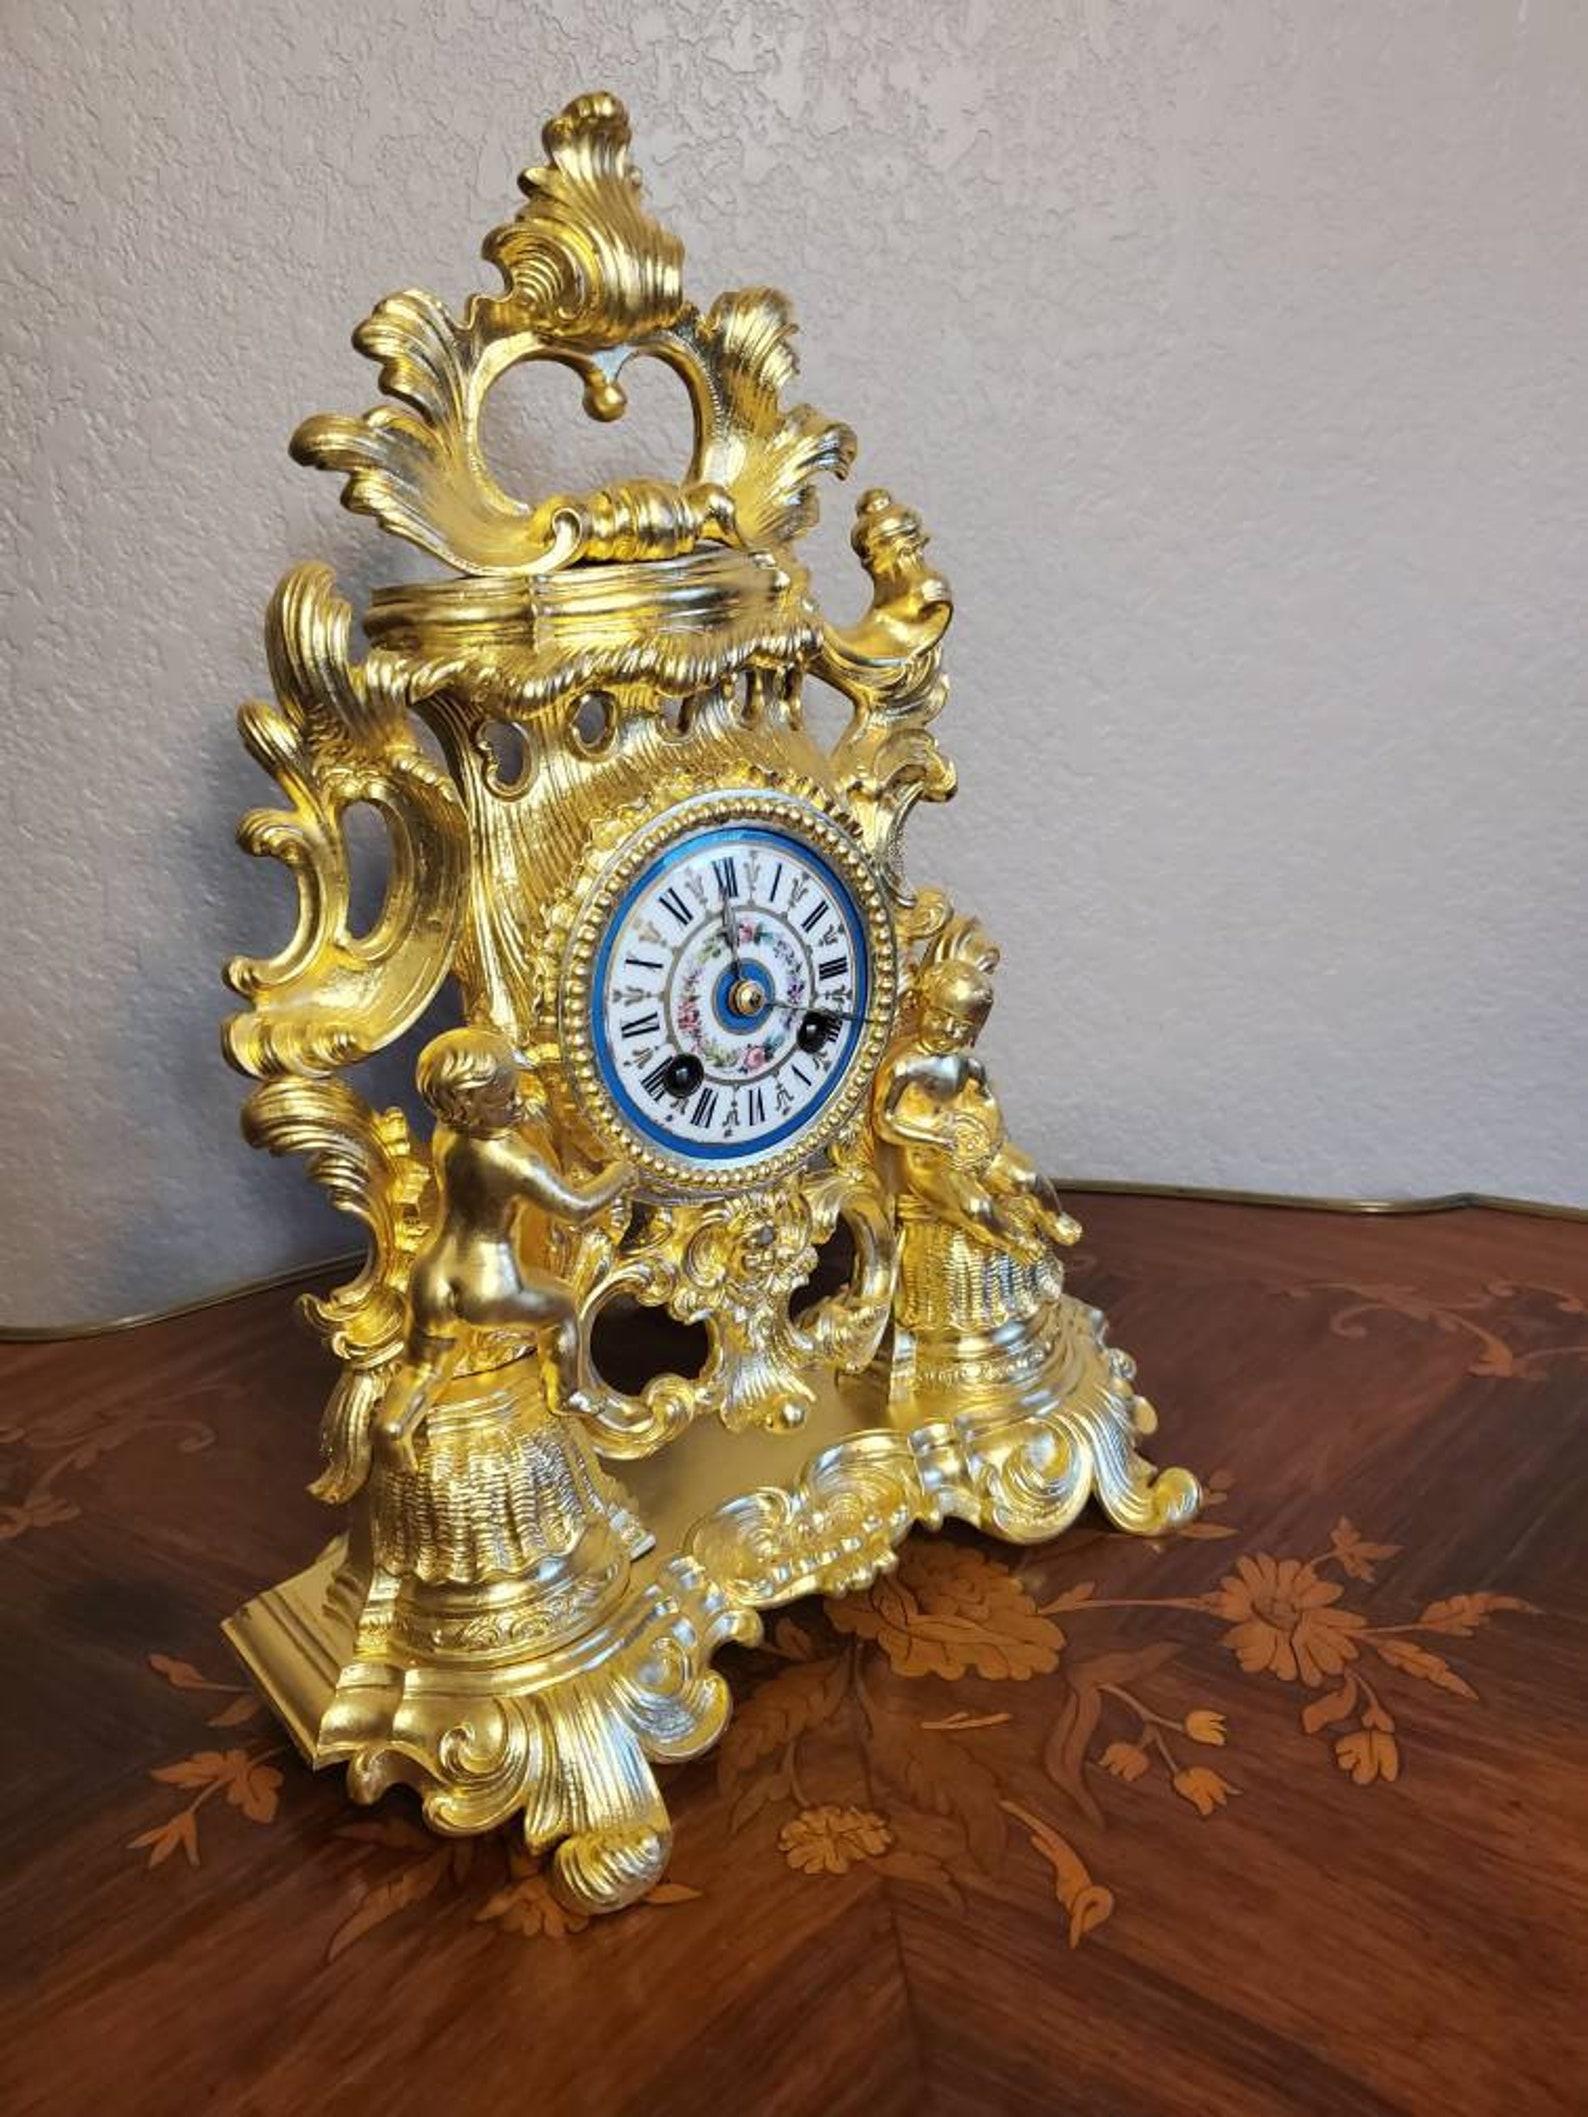 A stunning fine quality Napoleon III Second Empire Period (1852-1870) doré bronze (gilt bronze ormolu) shelf clock with signed Japy Freres eight-day time and strike movement. 

Born in Paris, France in the third quarter of the 19th century,